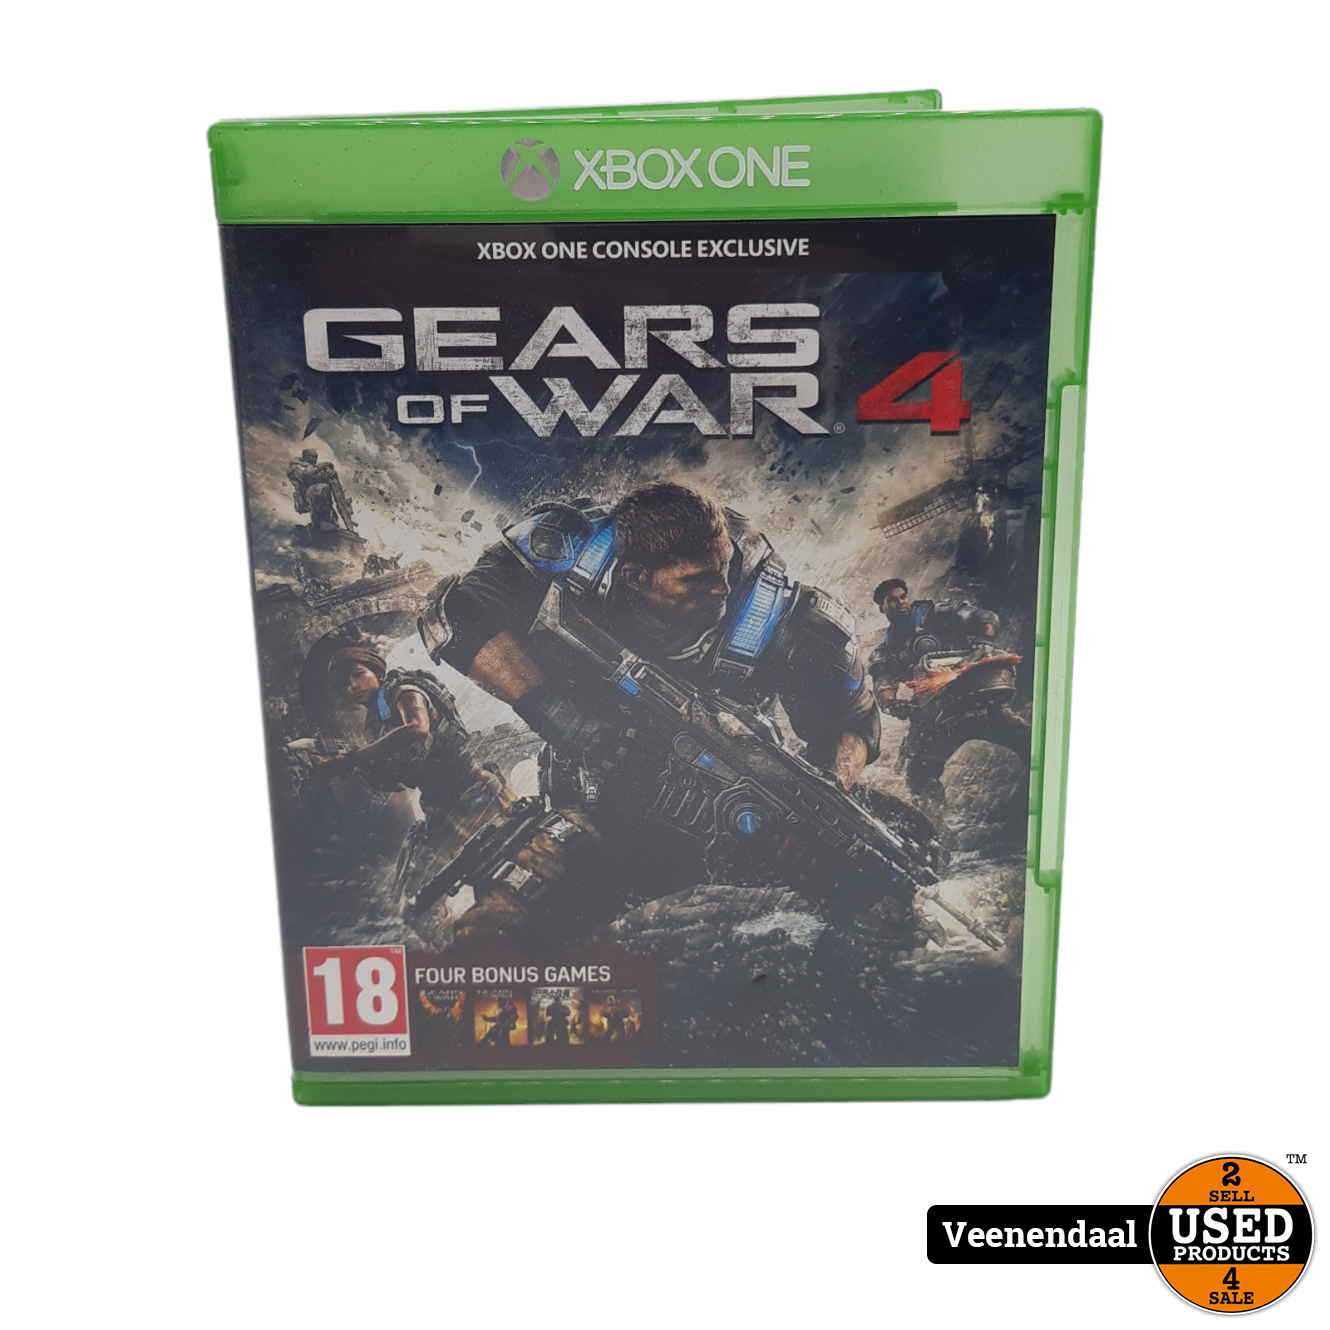 Zeemeeuw Catastrofe Paleis Gears of War 4 - Xbox One Game - Used Products Veenendaal